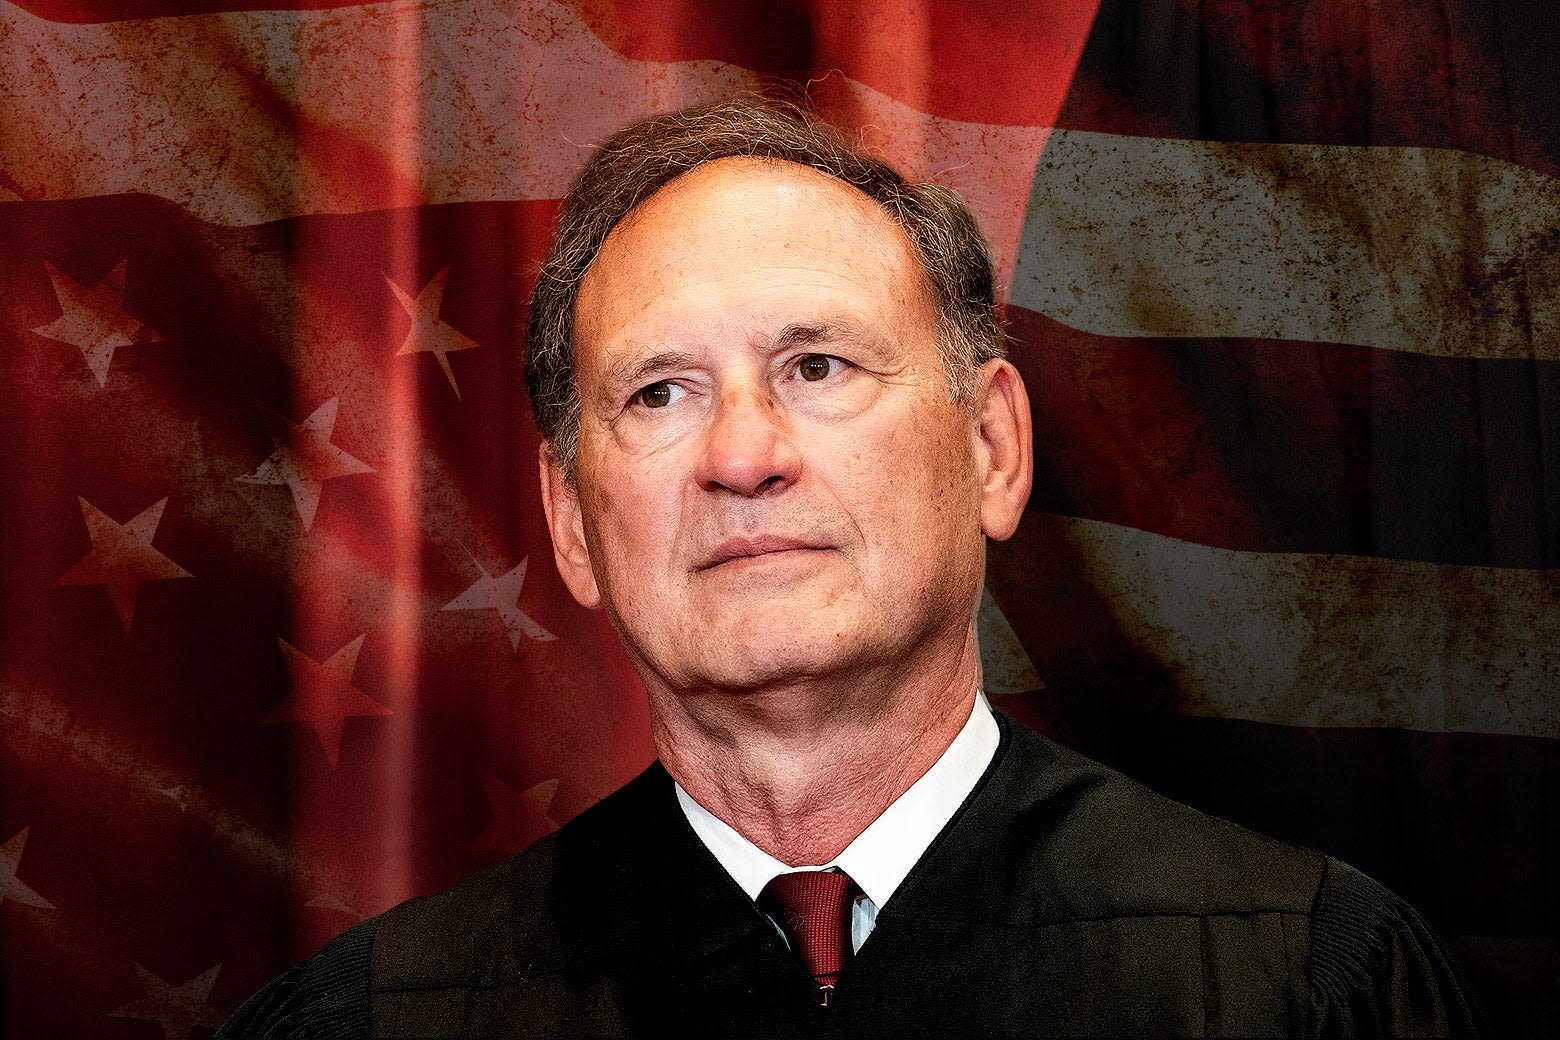 Alito’s Explanation for the Upside-Down American Flag Honestly Makes It Worse